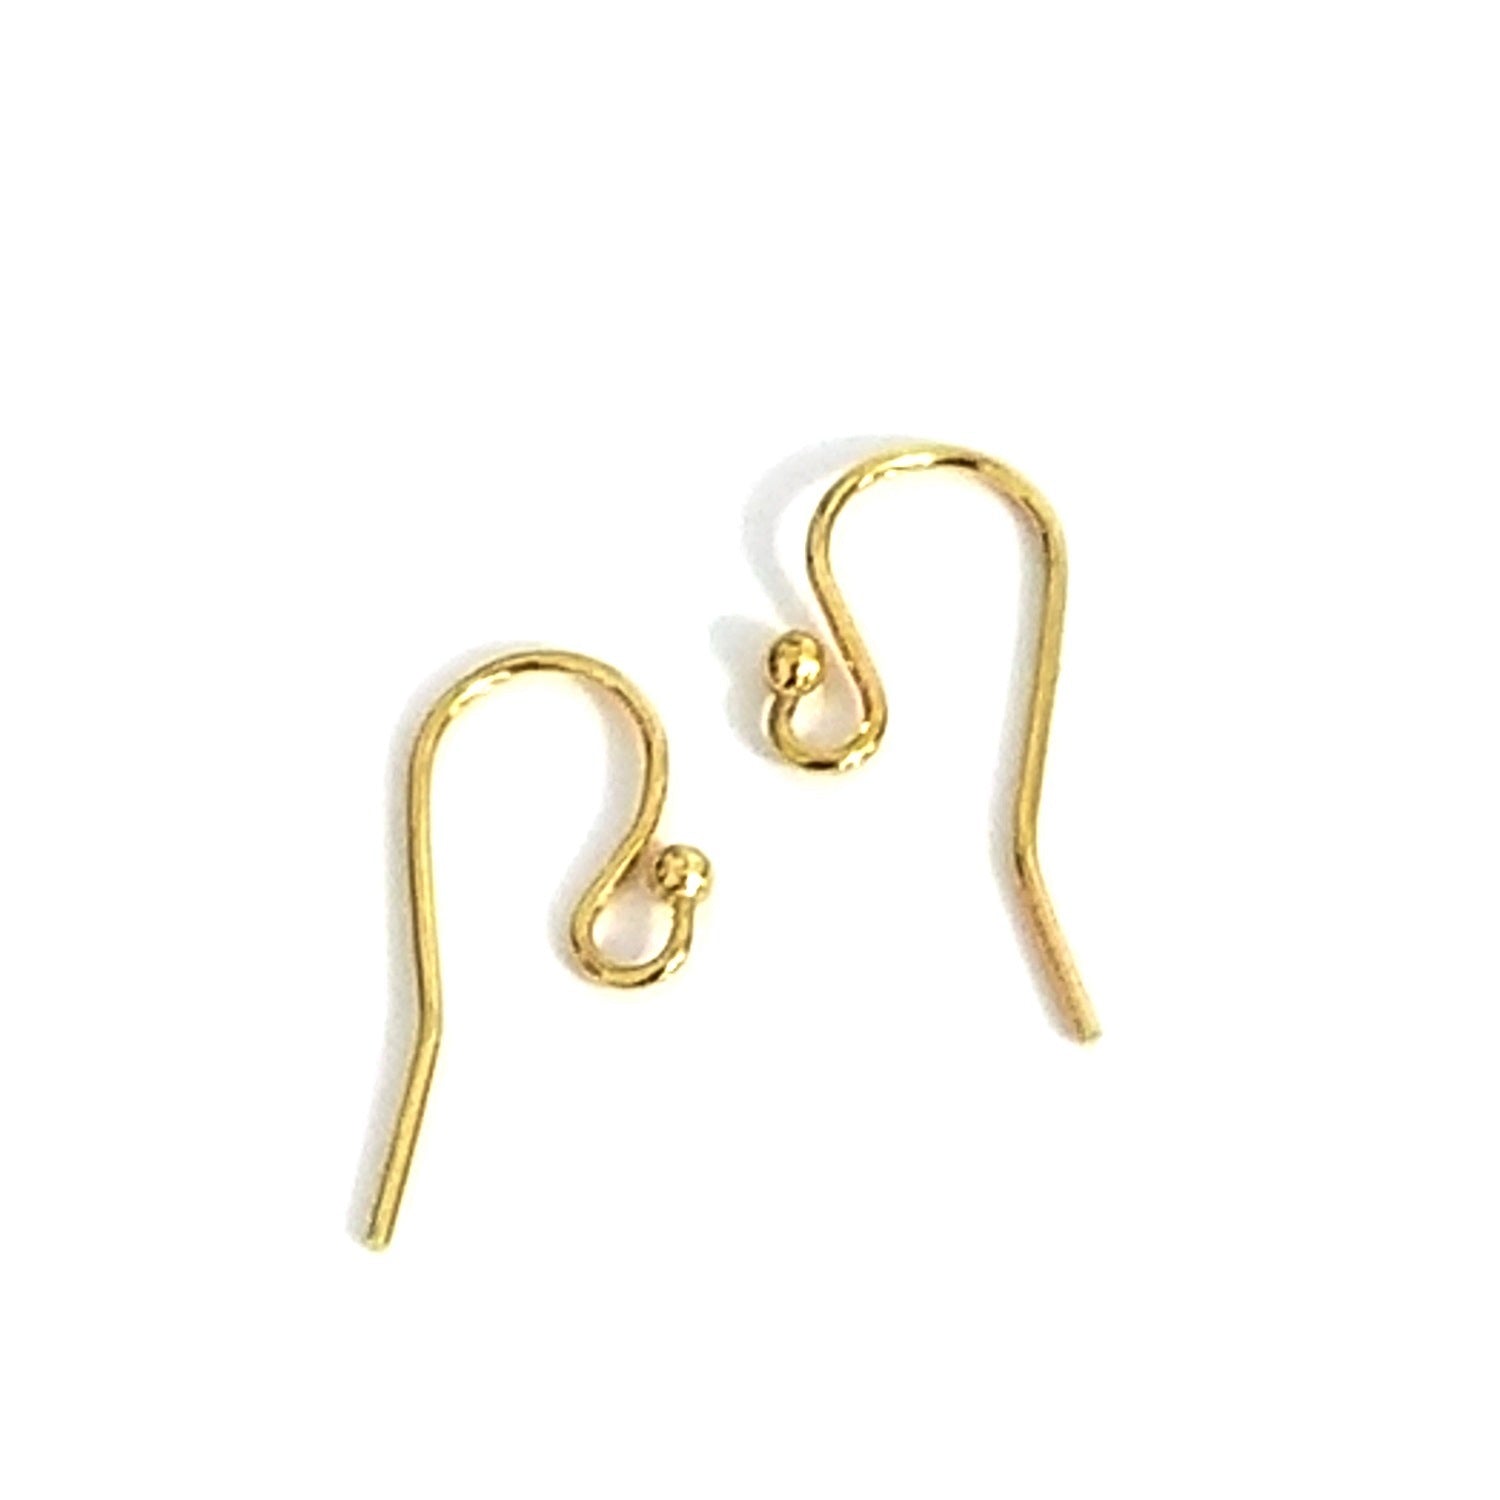  GG 50pcs/lot Stainless Steel Rose Gold Silver Earring Hooks  Earrings Clasps Findings Earring Wires for Jewelry Making Supplies DIY  T1124 (Color : Steel 17x15mm)